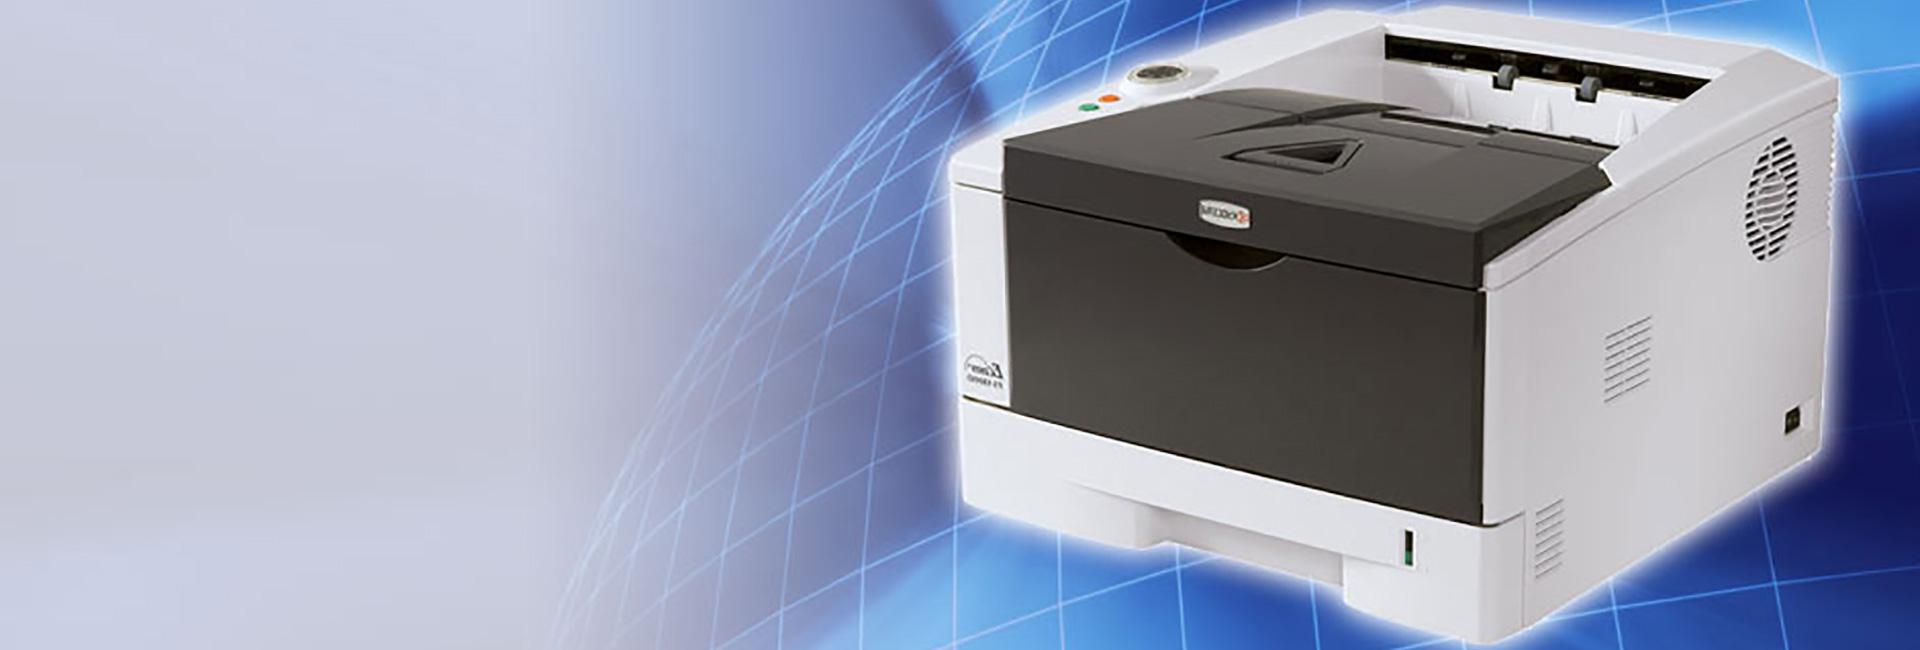 Compact and quiet, Kyocera Desktop Printers fits the needs of small offices and businesses.